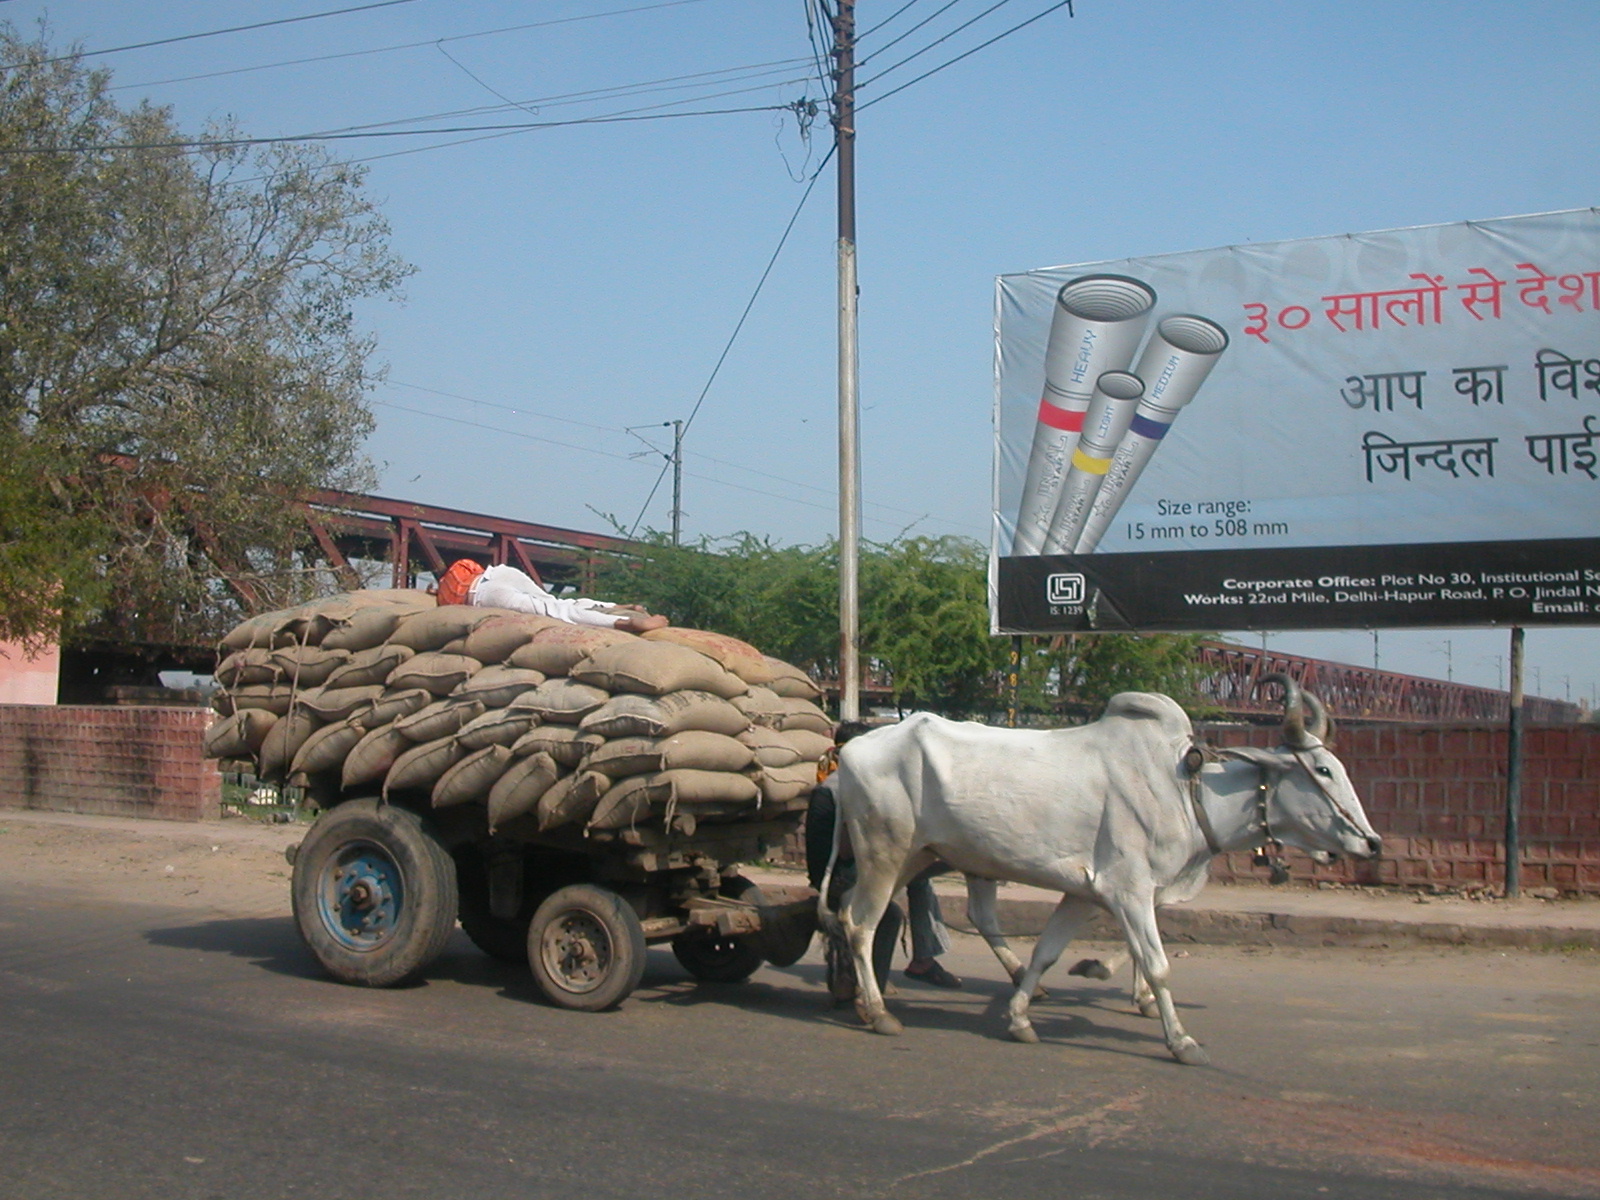 File:Cow cart in India.jpg - Wikimedia Commons